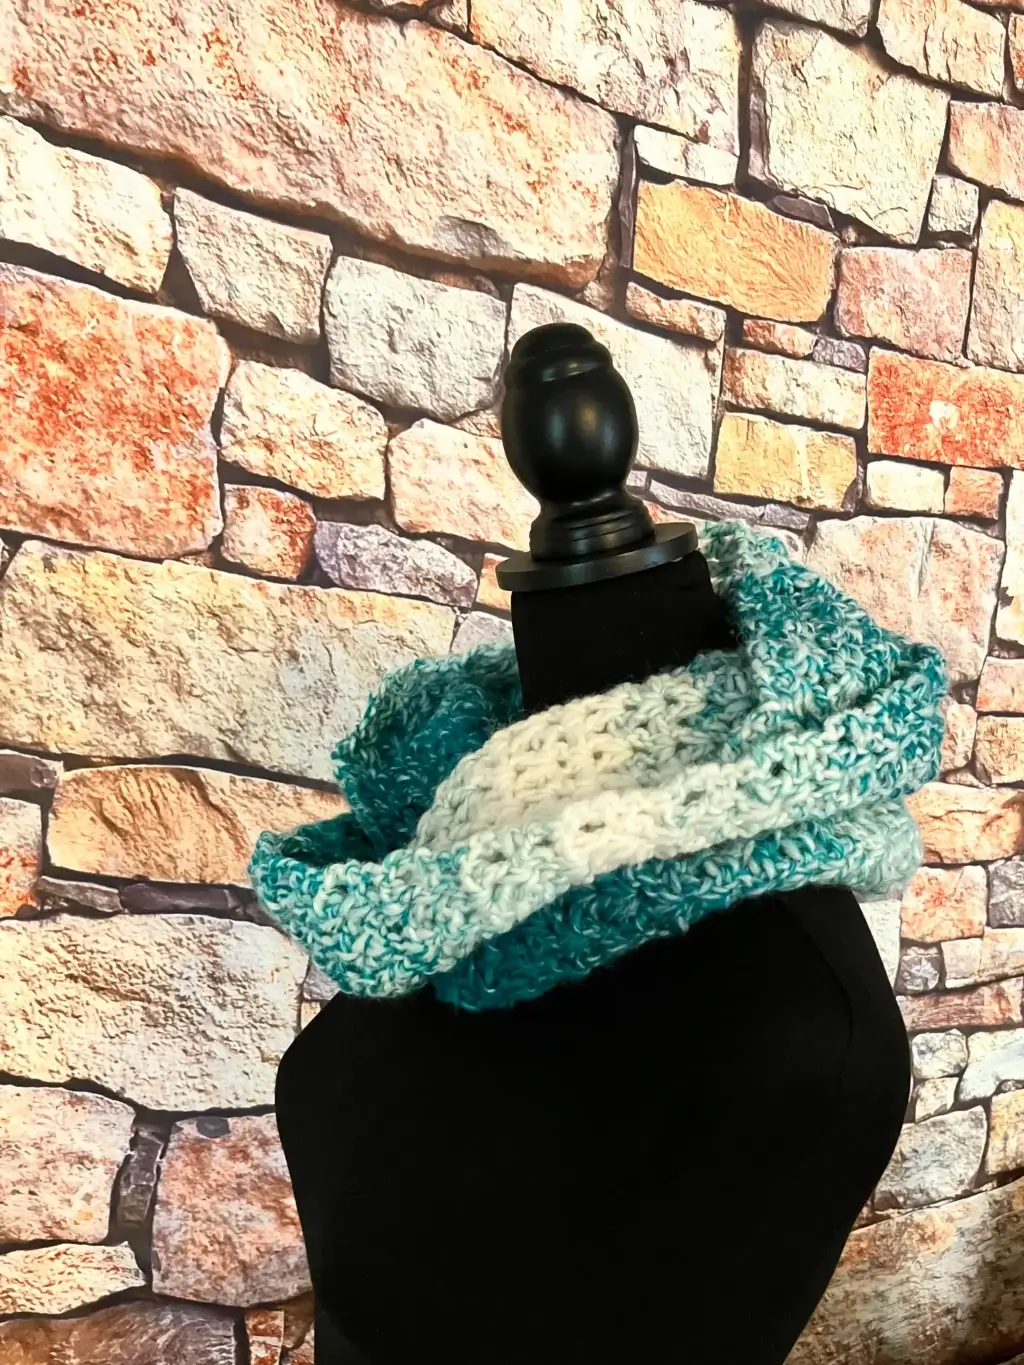 A white and teal crochet infinity scarf is displayed on a dressmaker's form.